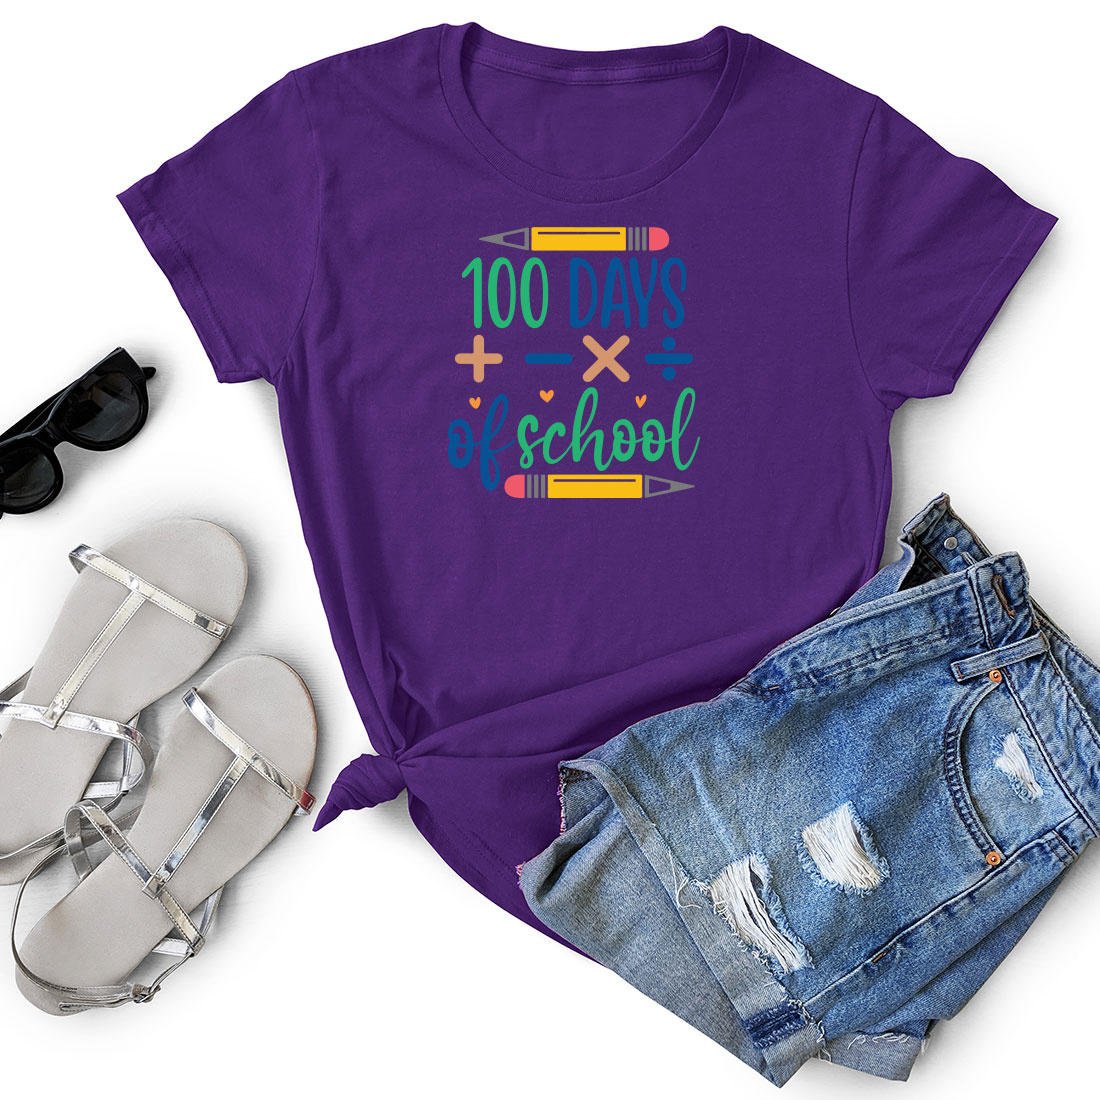 Purple shirt that says 100 days school next to a pair of shorts.